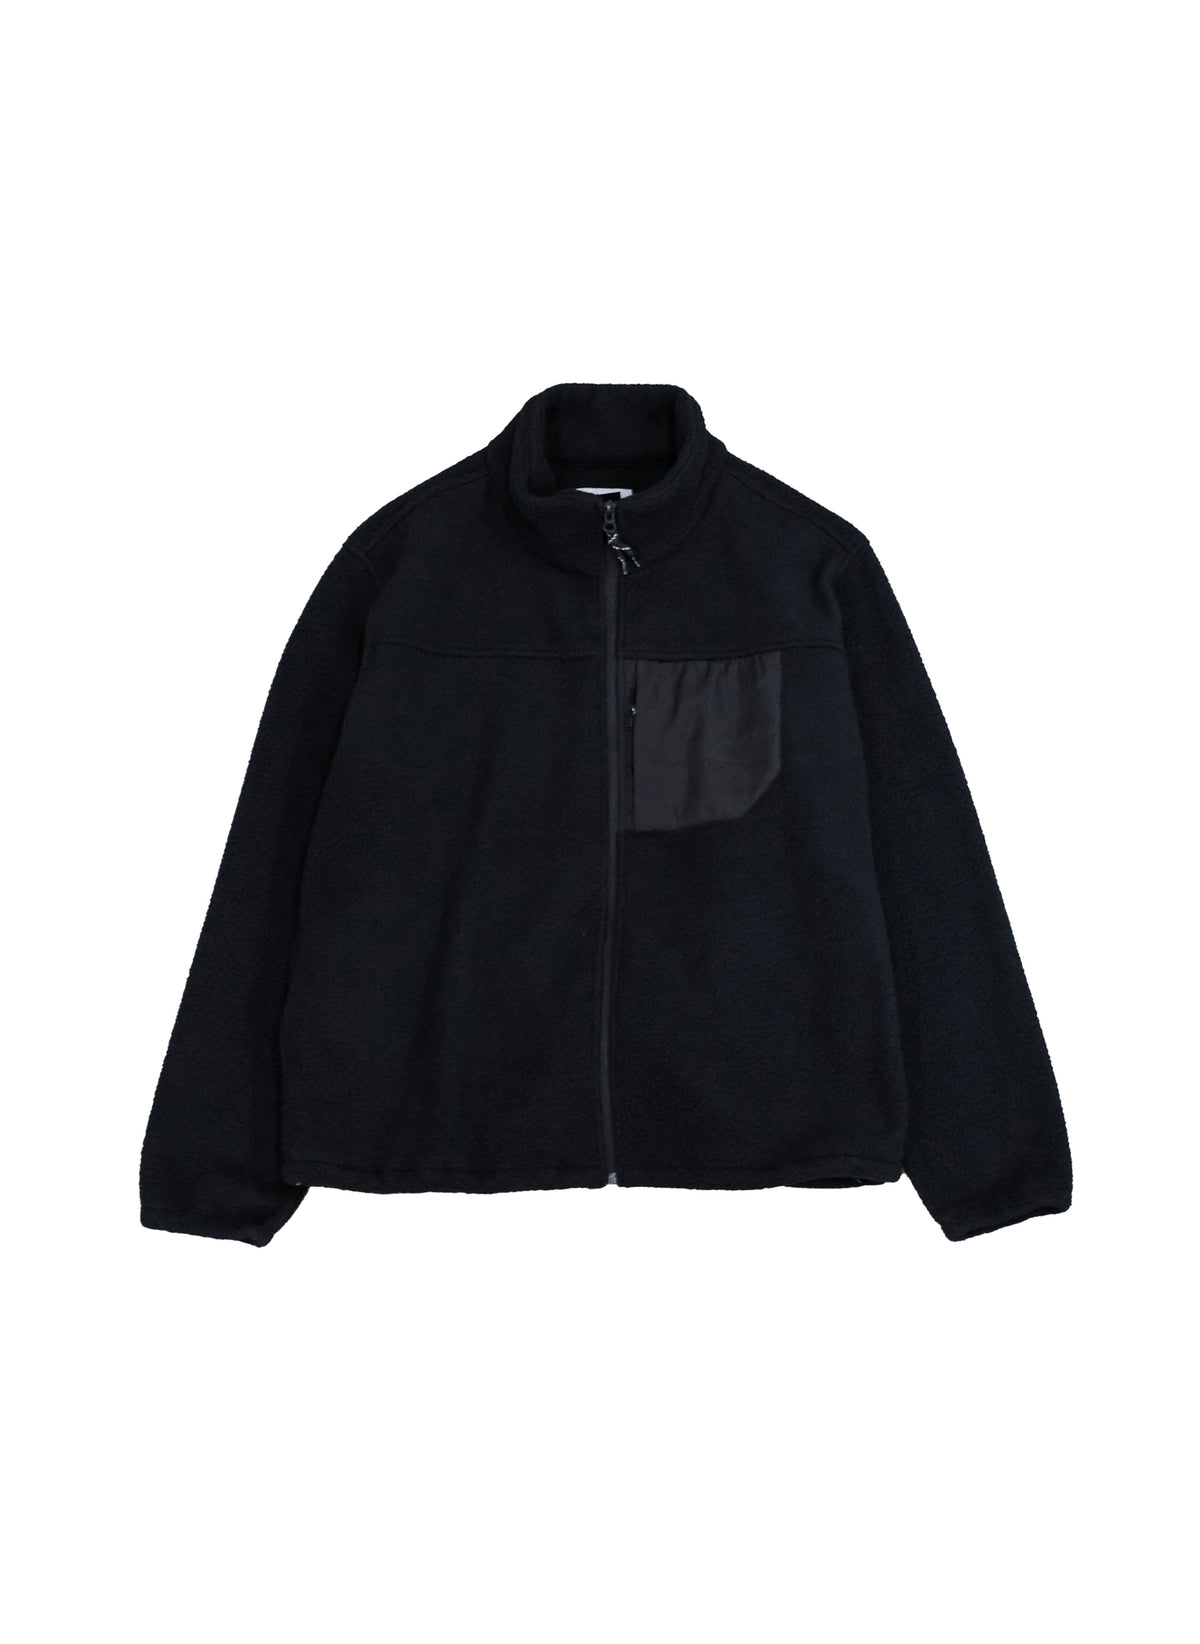 CCTB / FROM NORTHERN COUNTRY FLEECE JACKET  BLACK